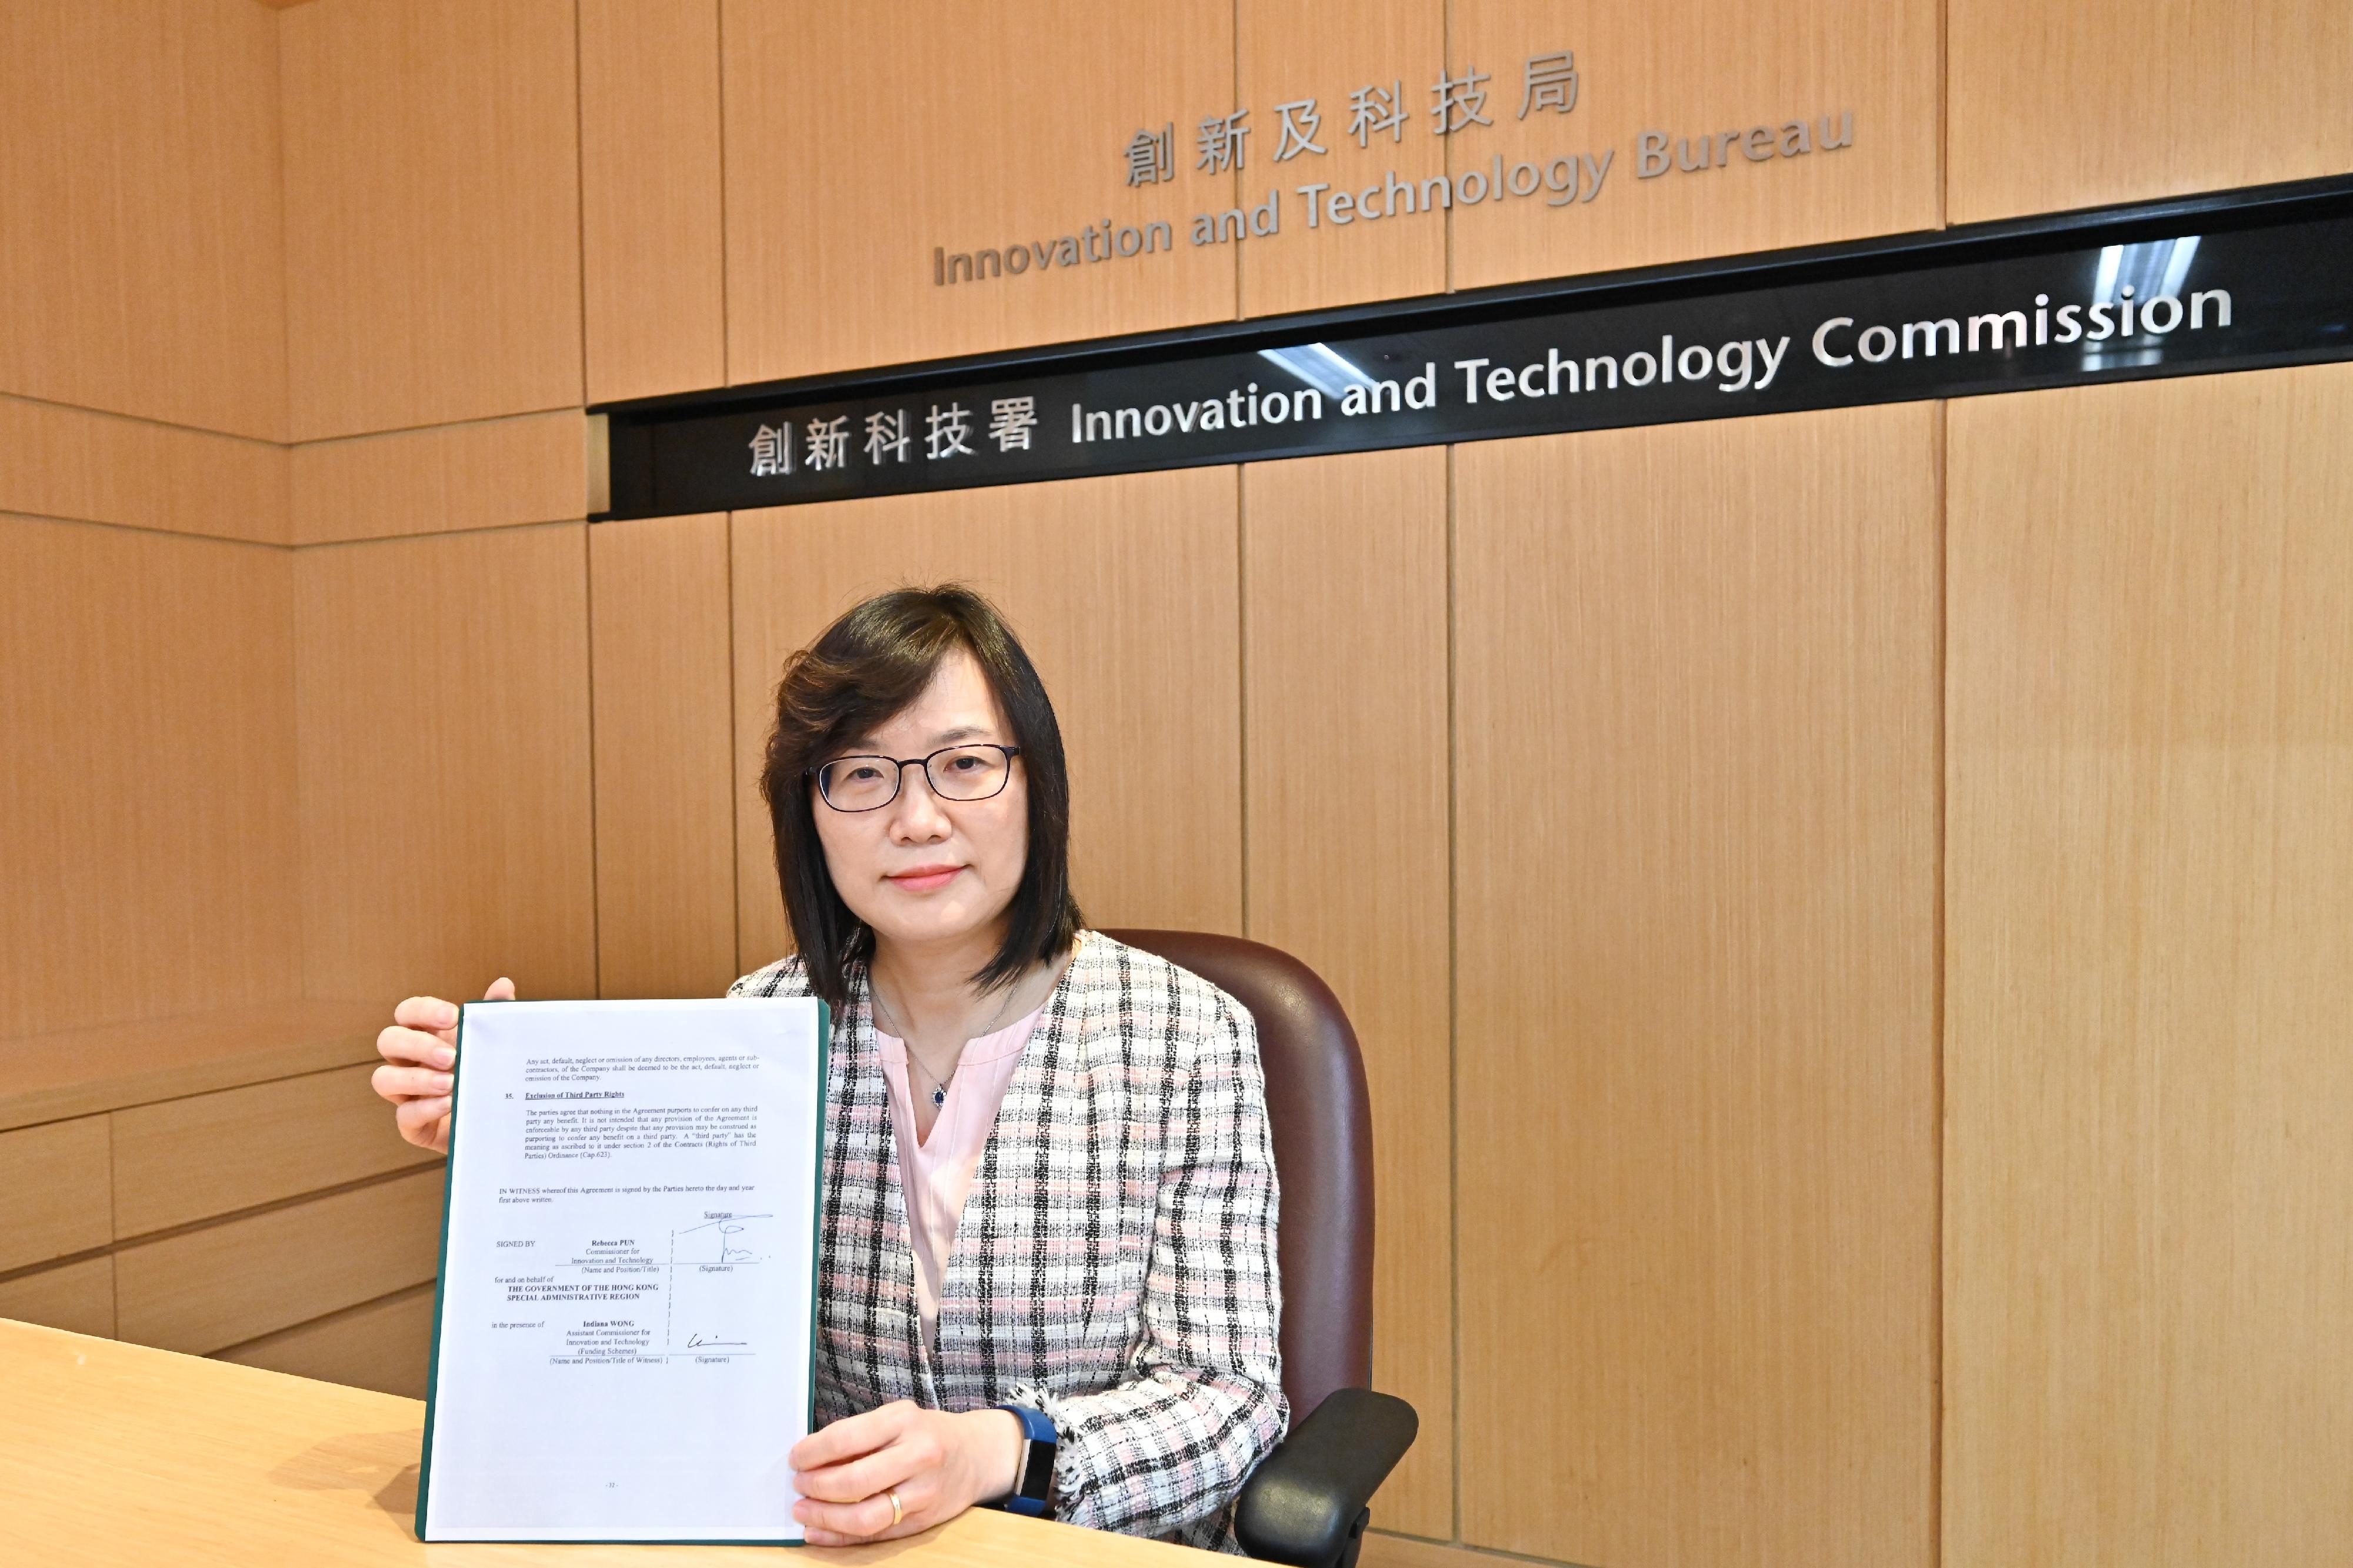 The Re-industrialisation Funding Scheme today (March 15) approved funding for a project to set up a smart production line for health food supplements by Catalo Natural Health Foods Limited. Photo shows the Commissioner for Innovation and Technology, Ms Rebecca Pun, who signed the funding agreement.